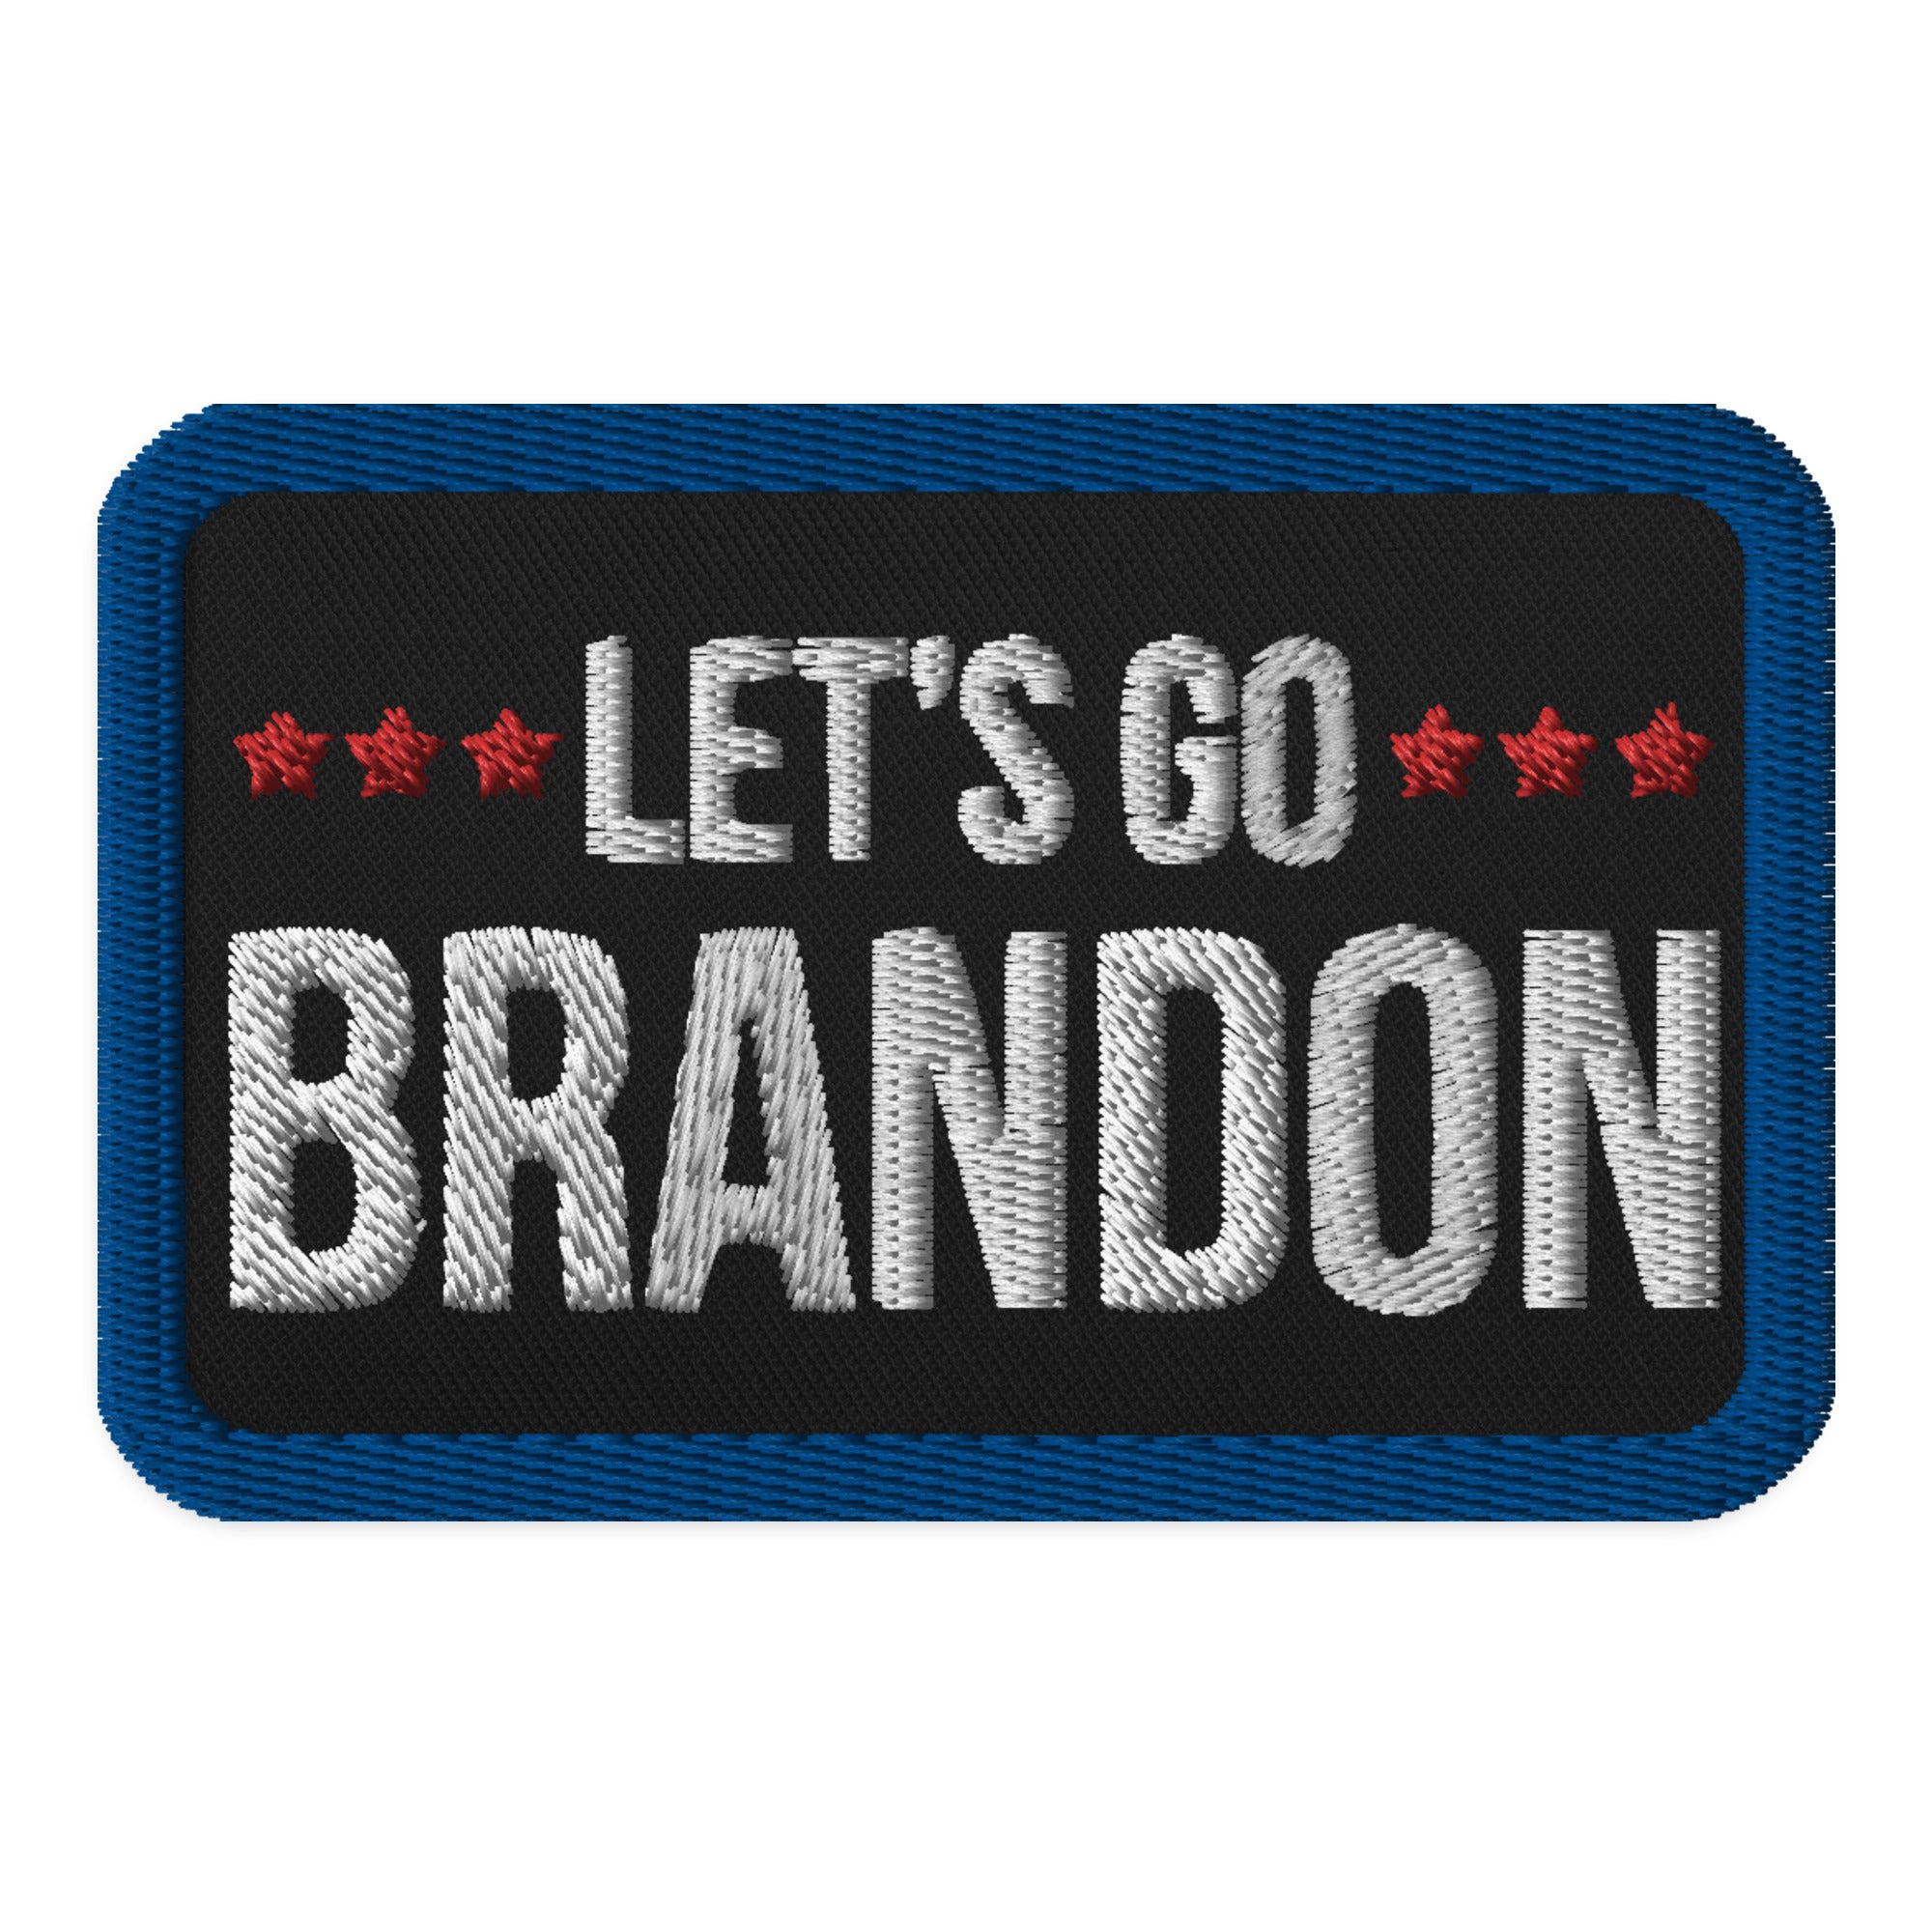 What does 'Let's Go Brandon' mean?